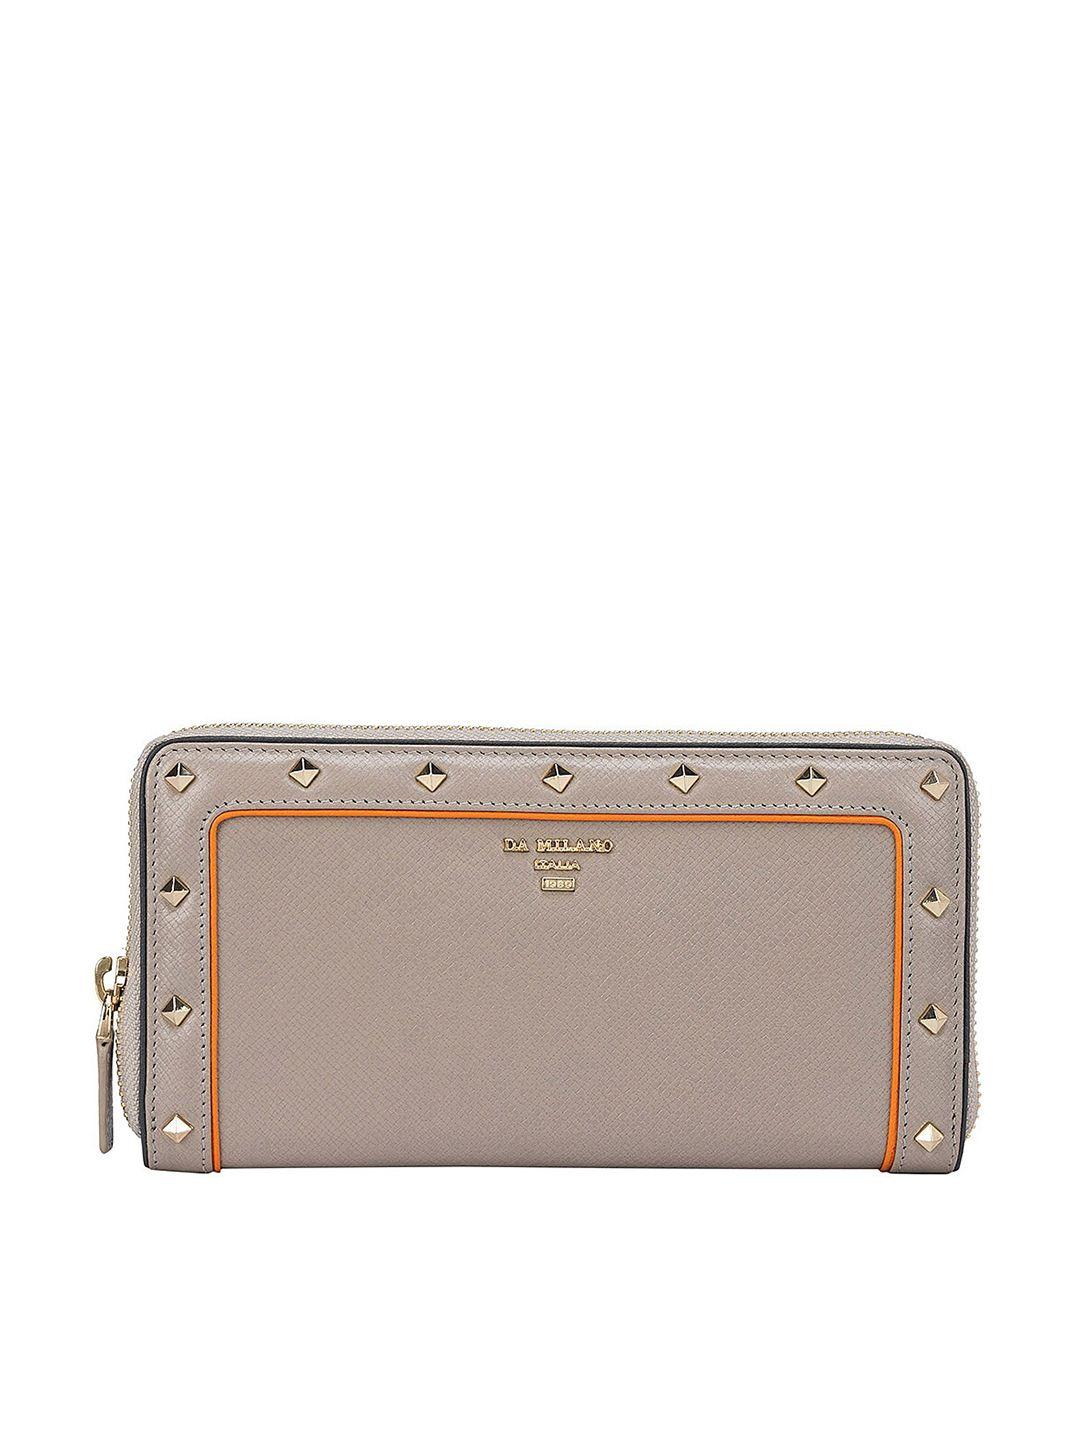 da-milano-women-beige-&-gold-toned-textured-leather-two-fold-wallet